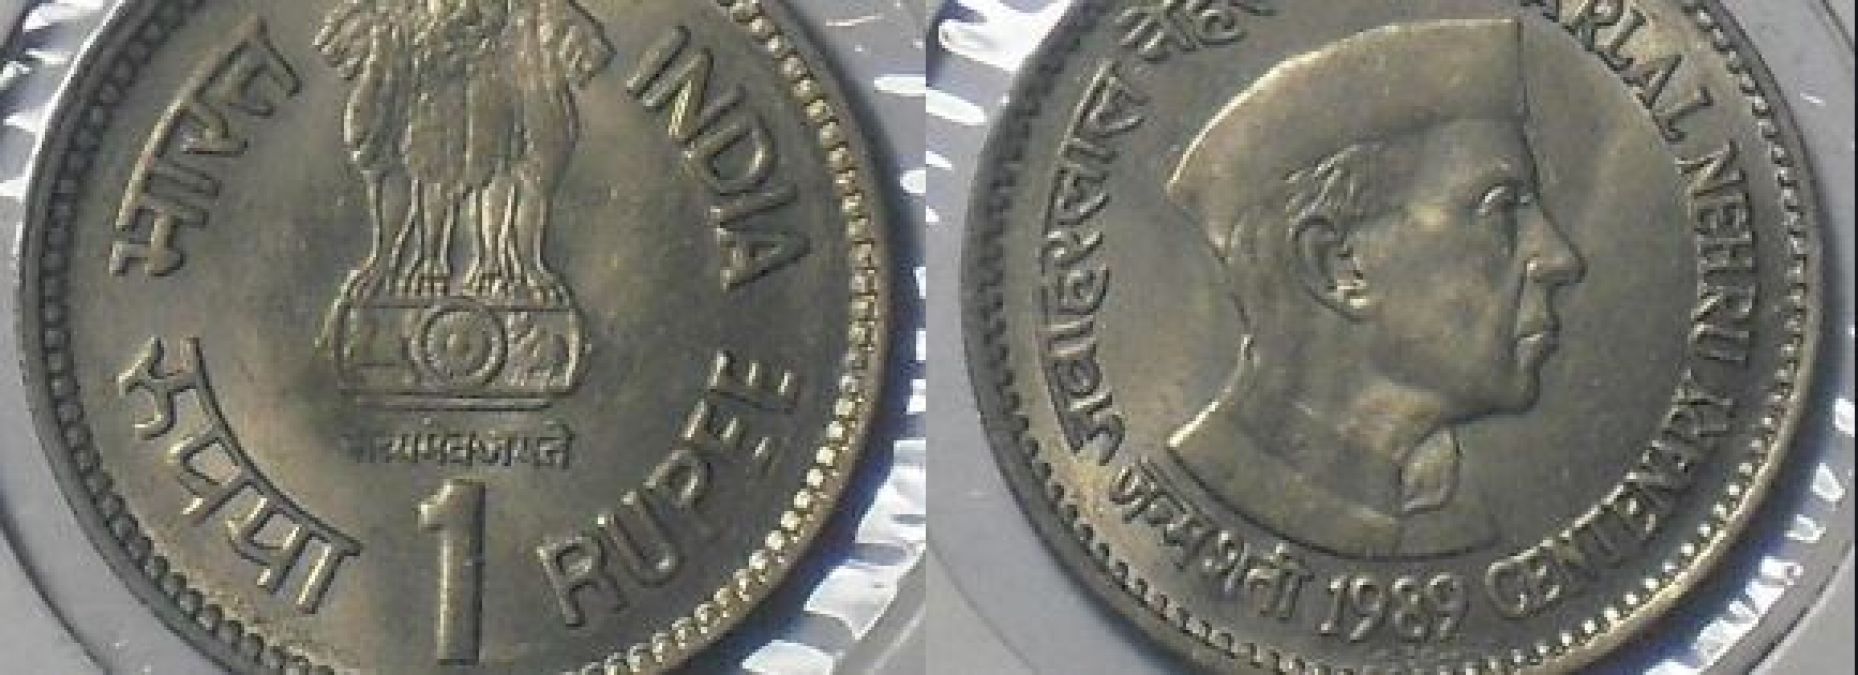 If you also have such a 1 rupee coin, you can become a millionaire